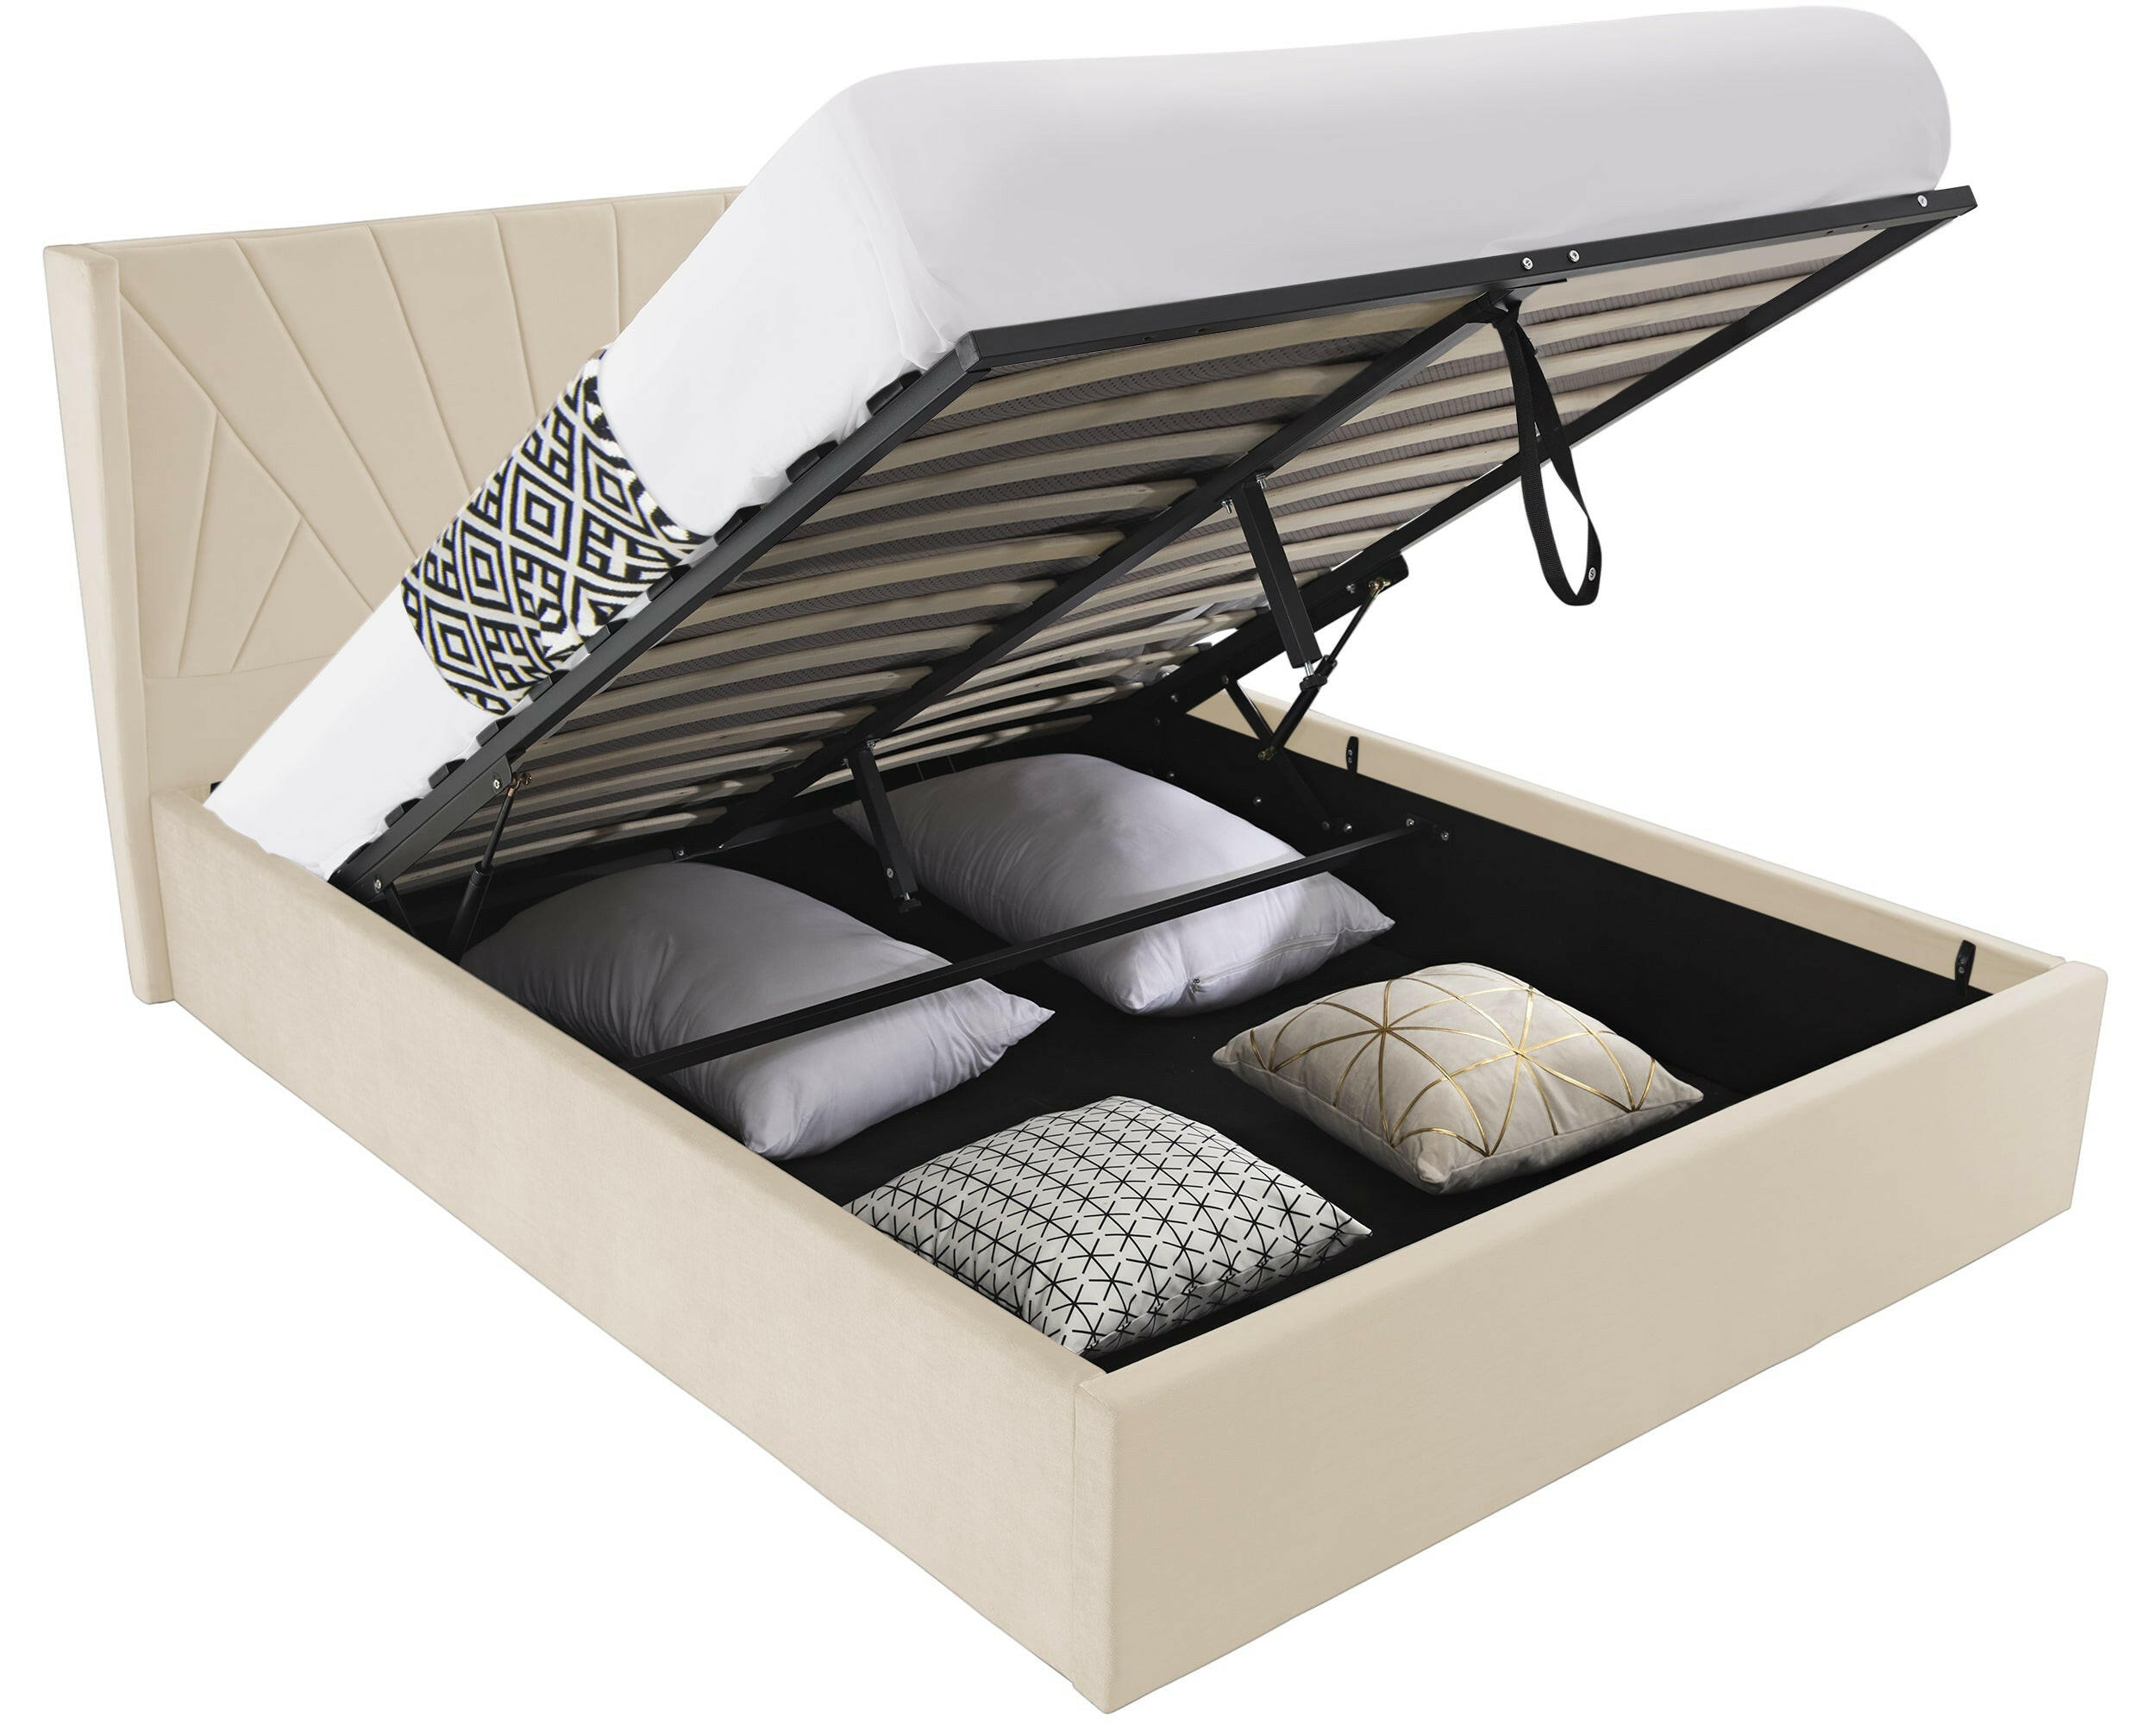 double ottoman bed